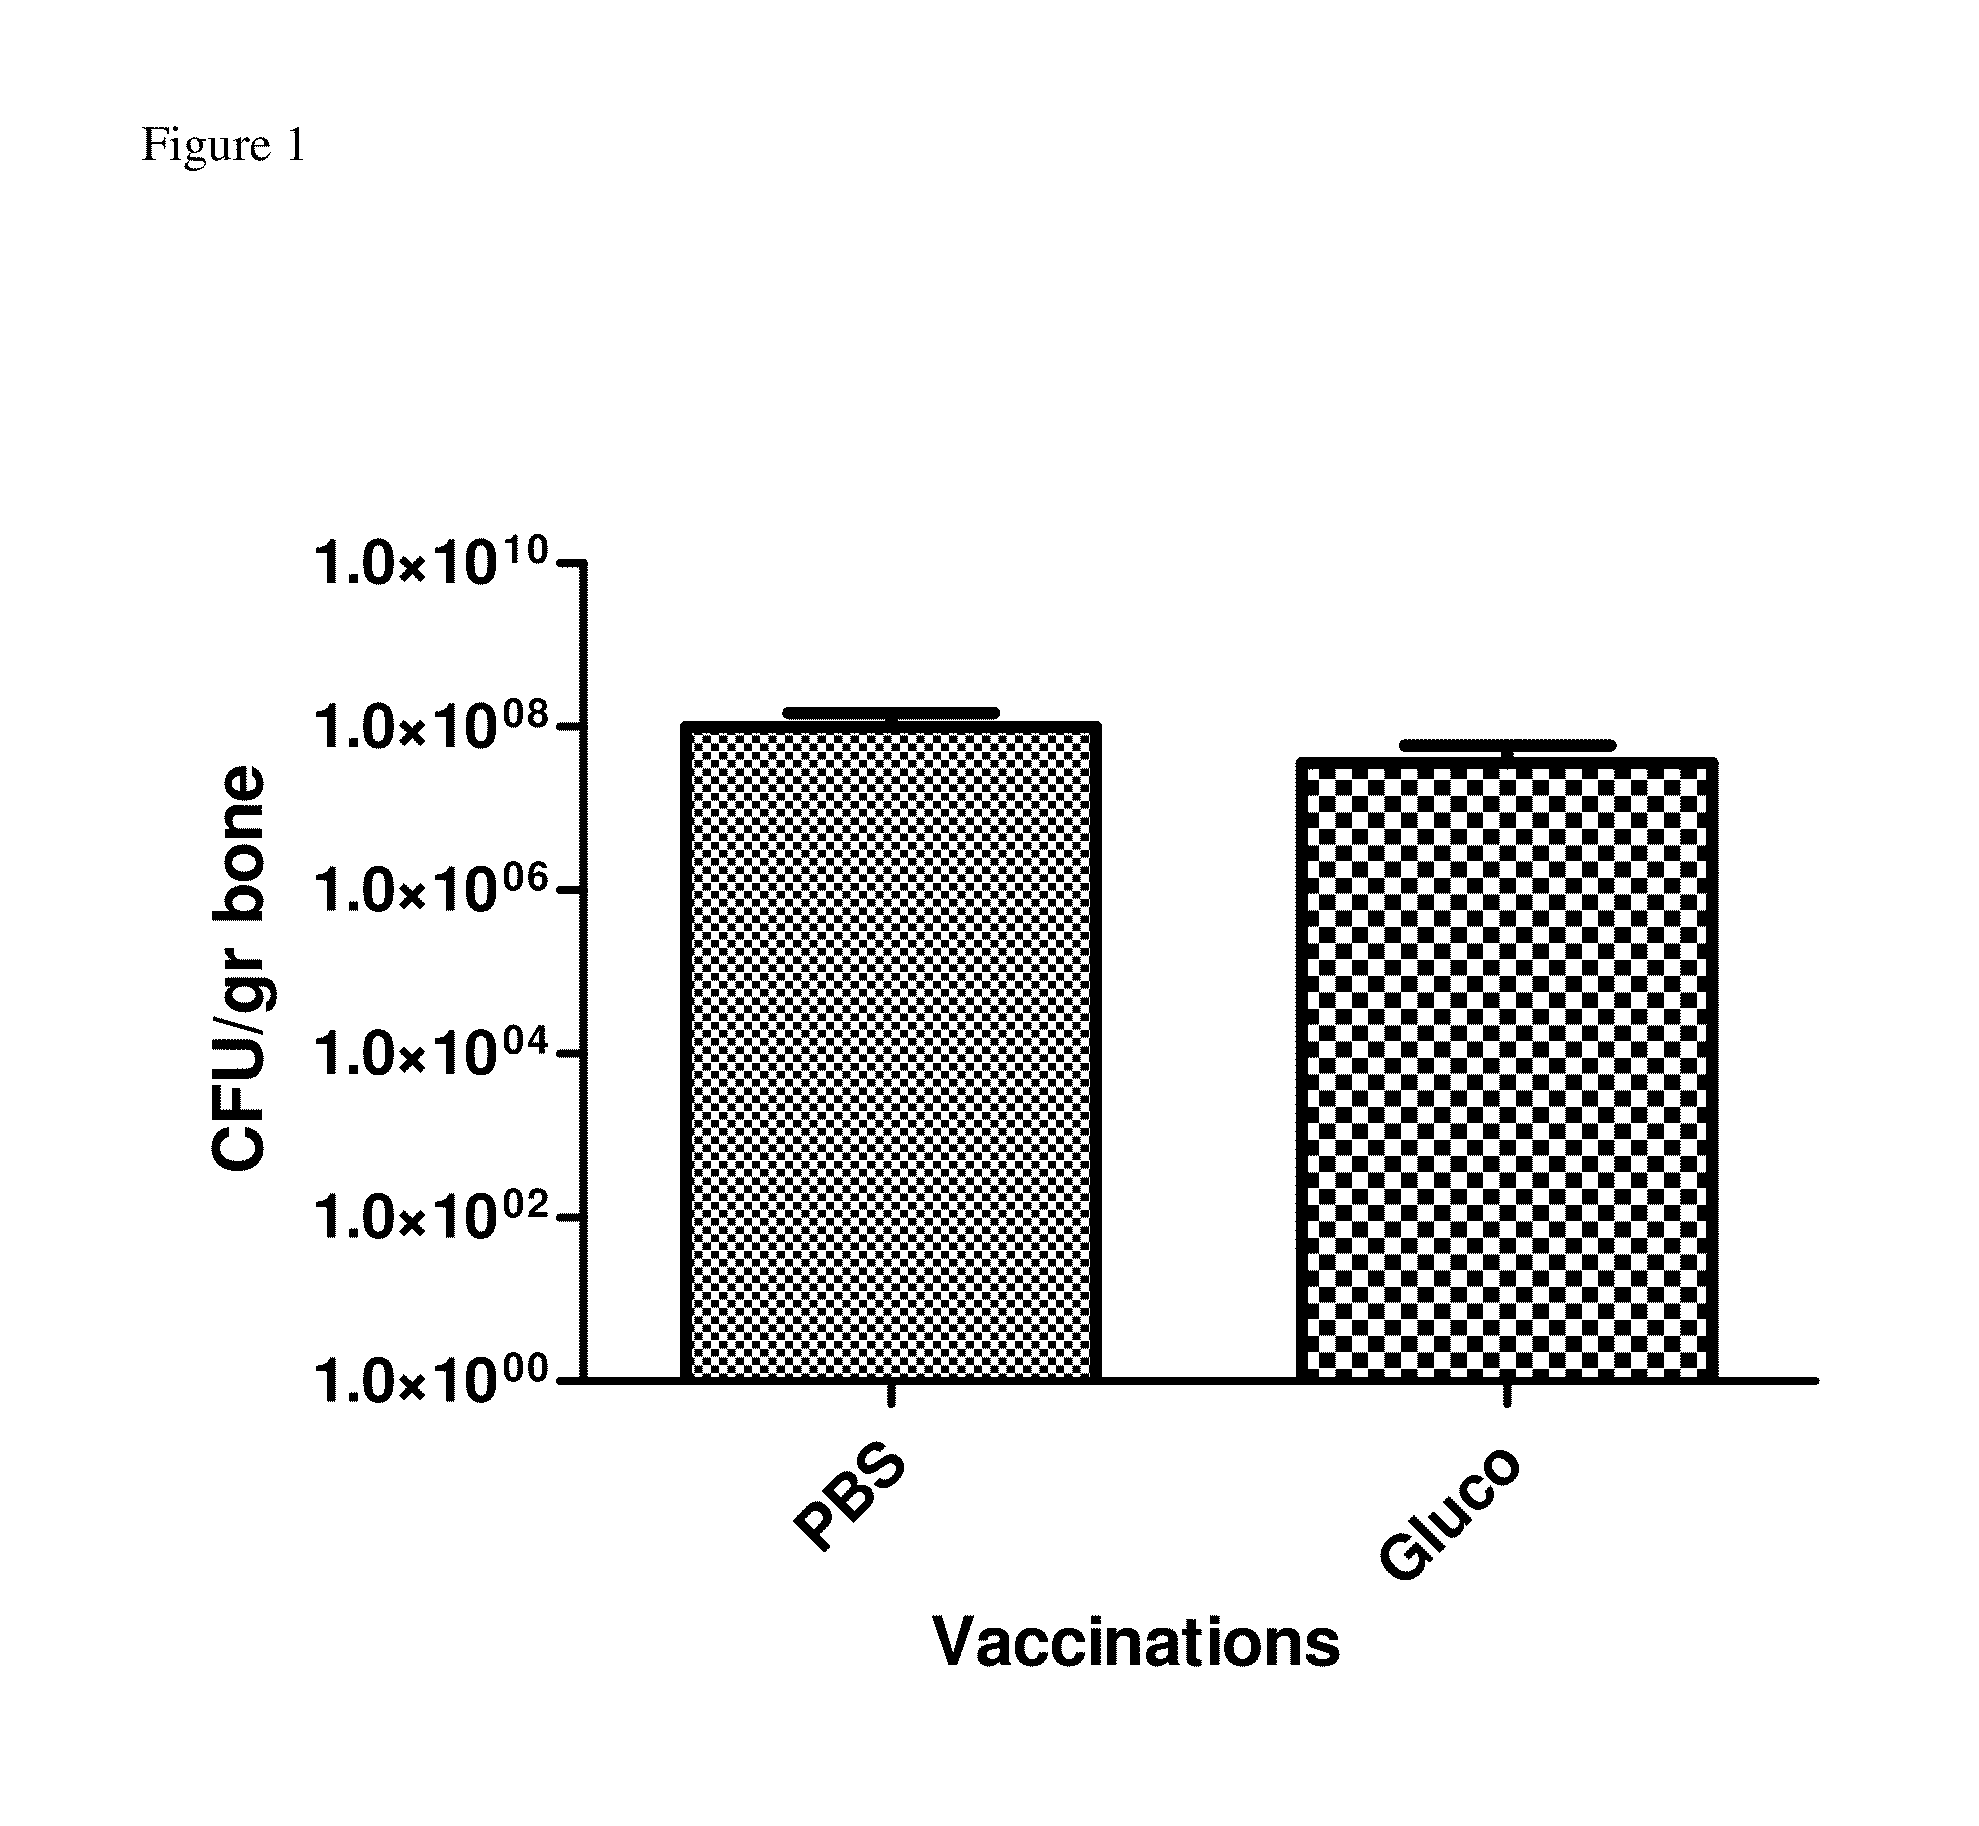 Protective vaccine against staphylococcus aureus biofilms comprising cell wall-associated immunogens